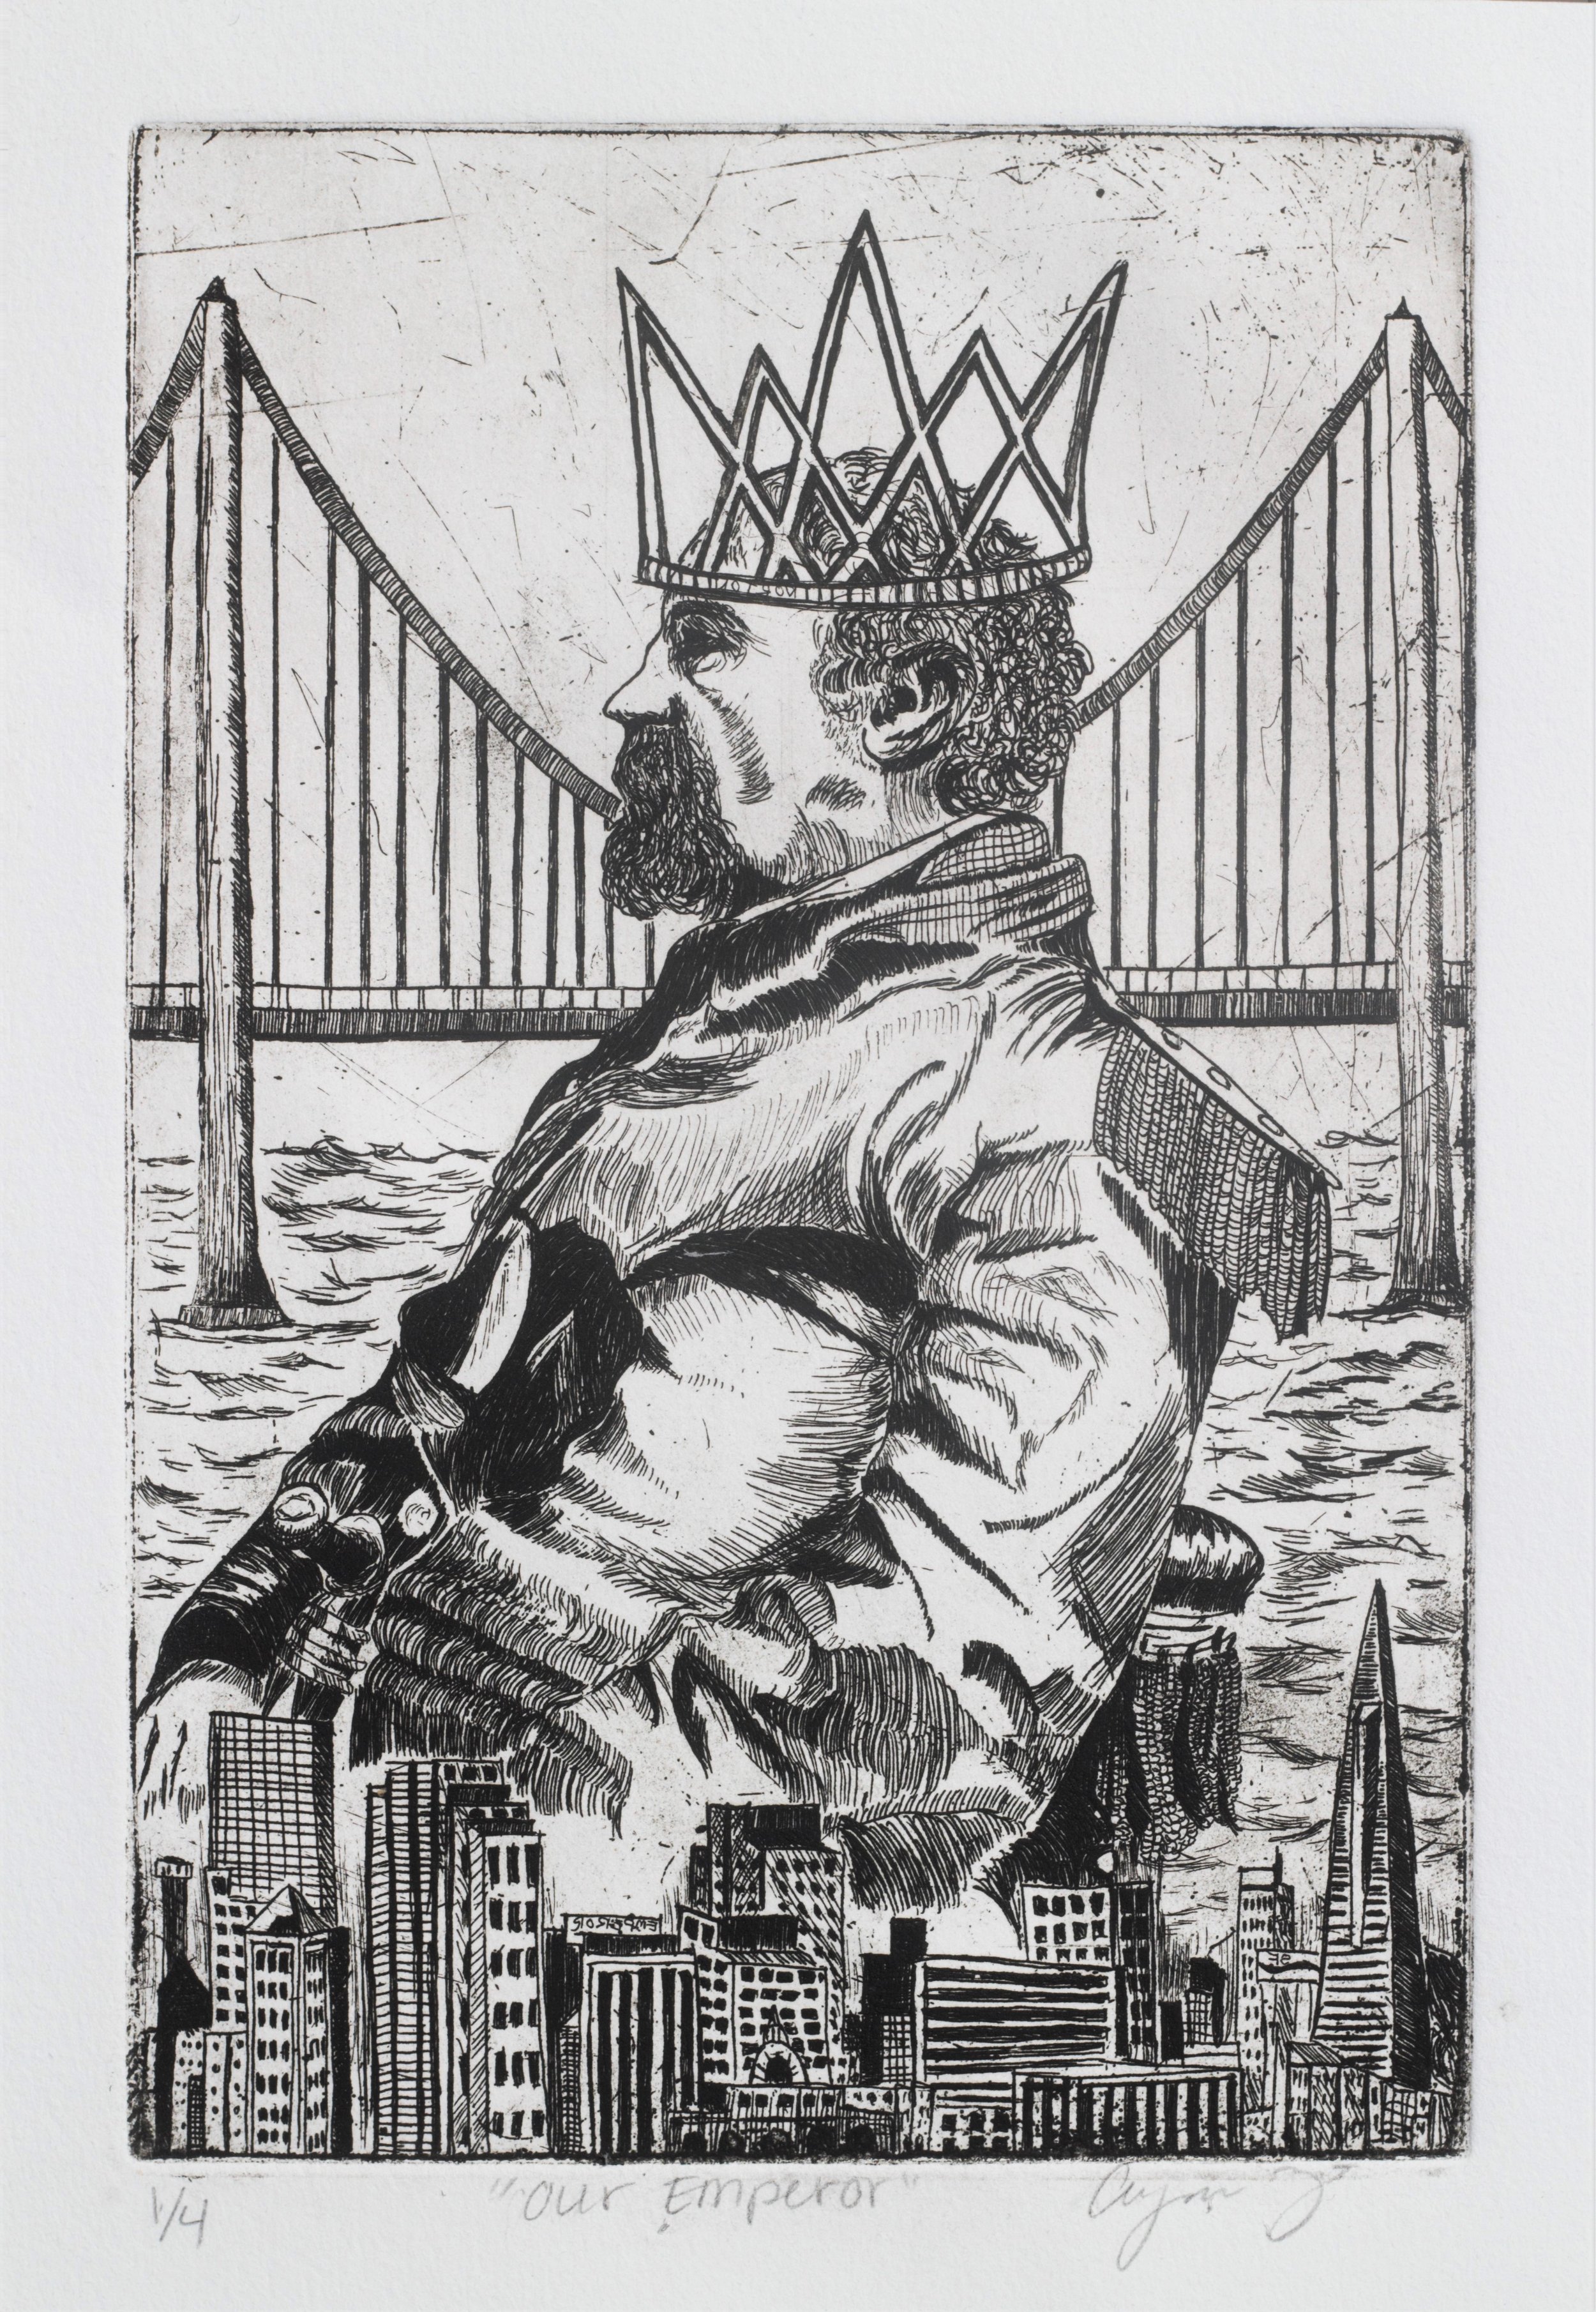   “Our Emperor,” 2017, by Ari Martinez (b.1994).  Intaglio print on BFK paper, 6” x 9”. The Emperor figure is based on the c.1878 Bradley &amp; Rulofson portrait of Emperor Norton shown  here . Artists’s  website  and  Instagram . Source: Ari Martine